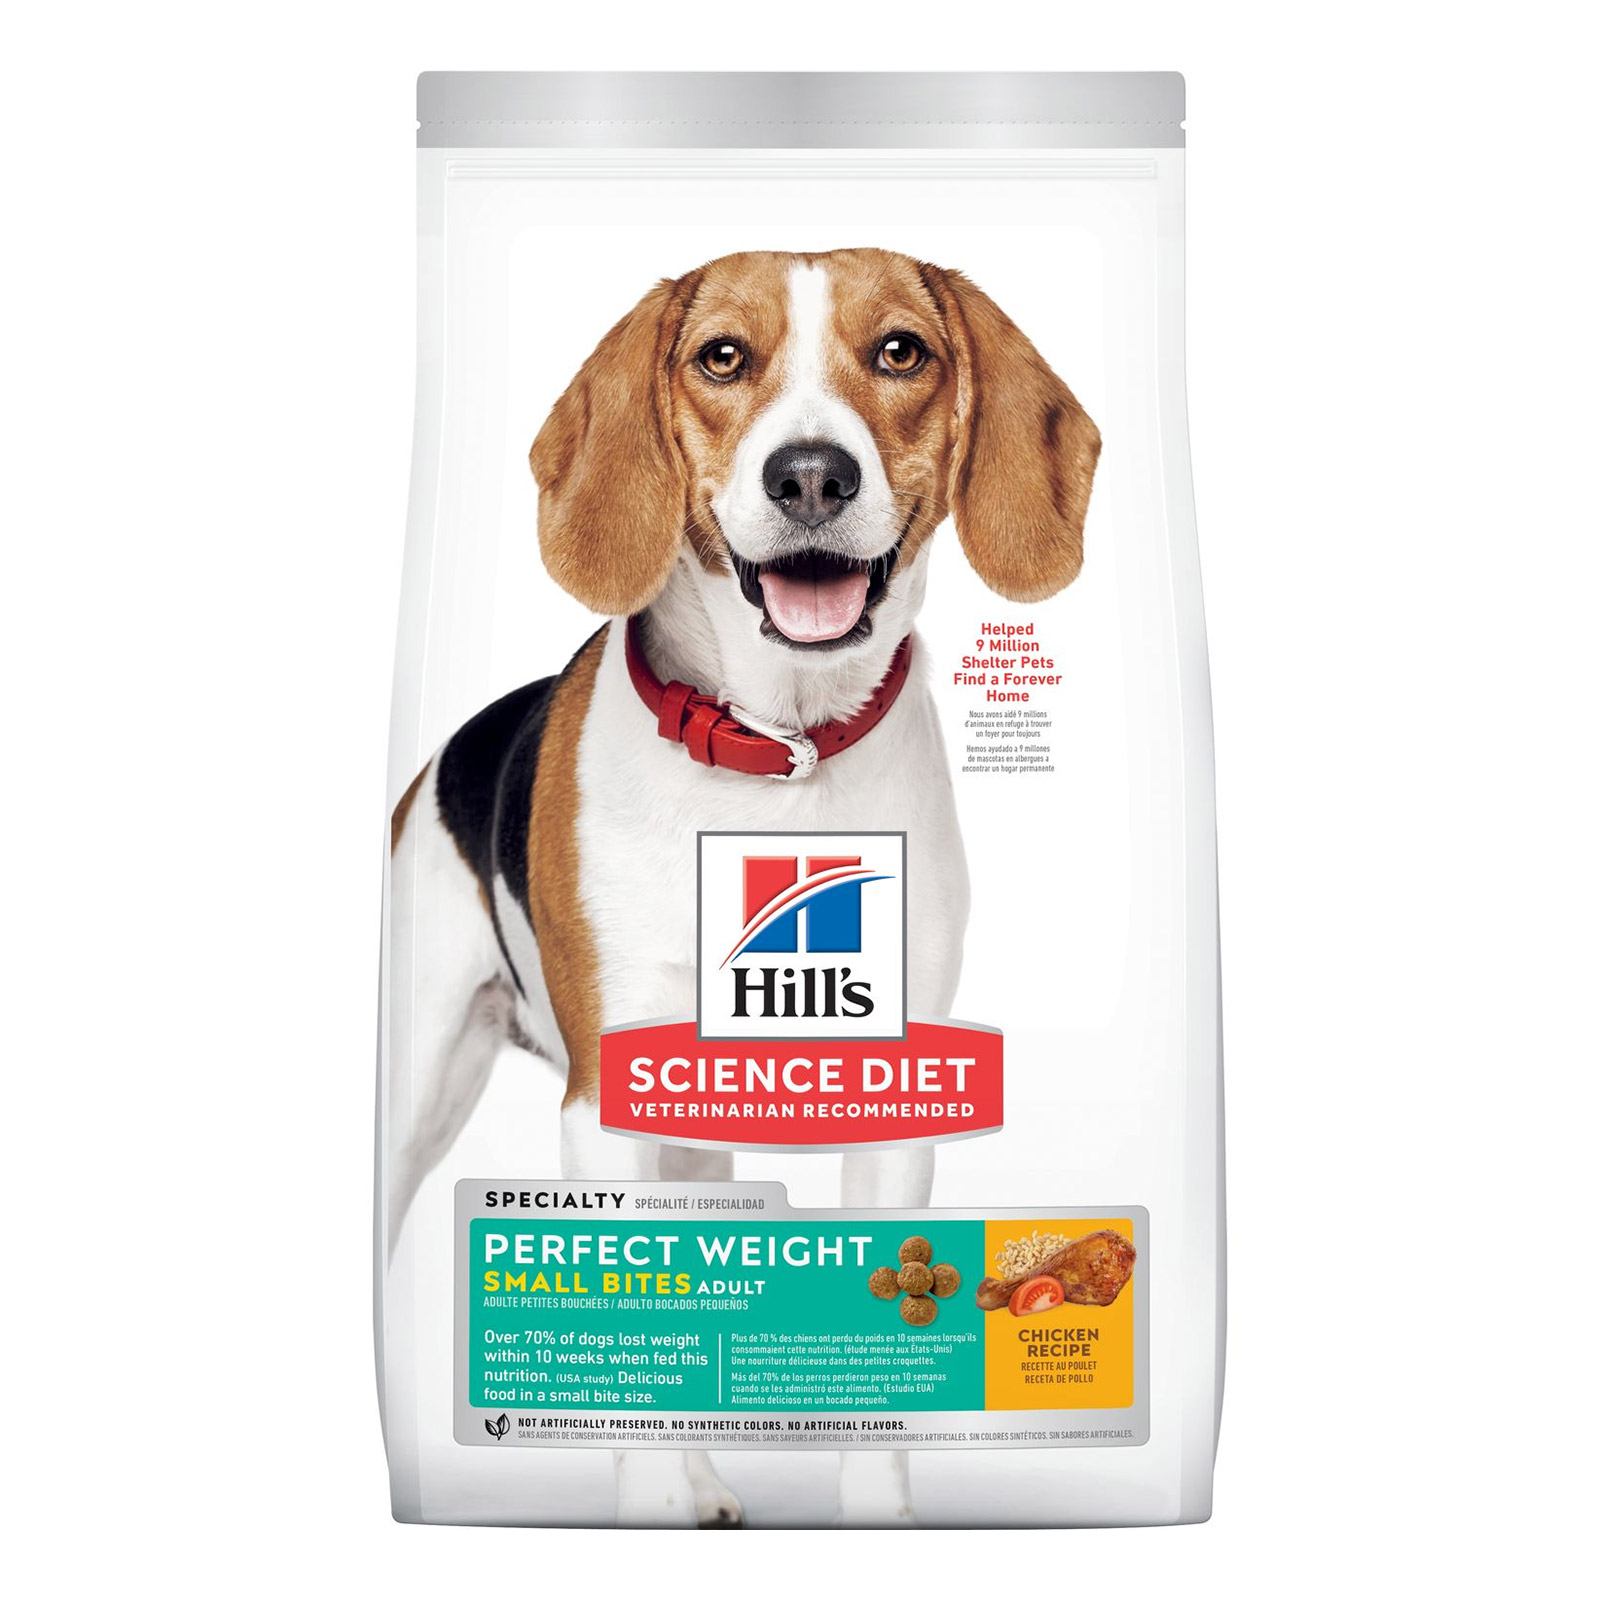 Hill's Science Diet Adult Perfect Weight Small Bites Dog Food